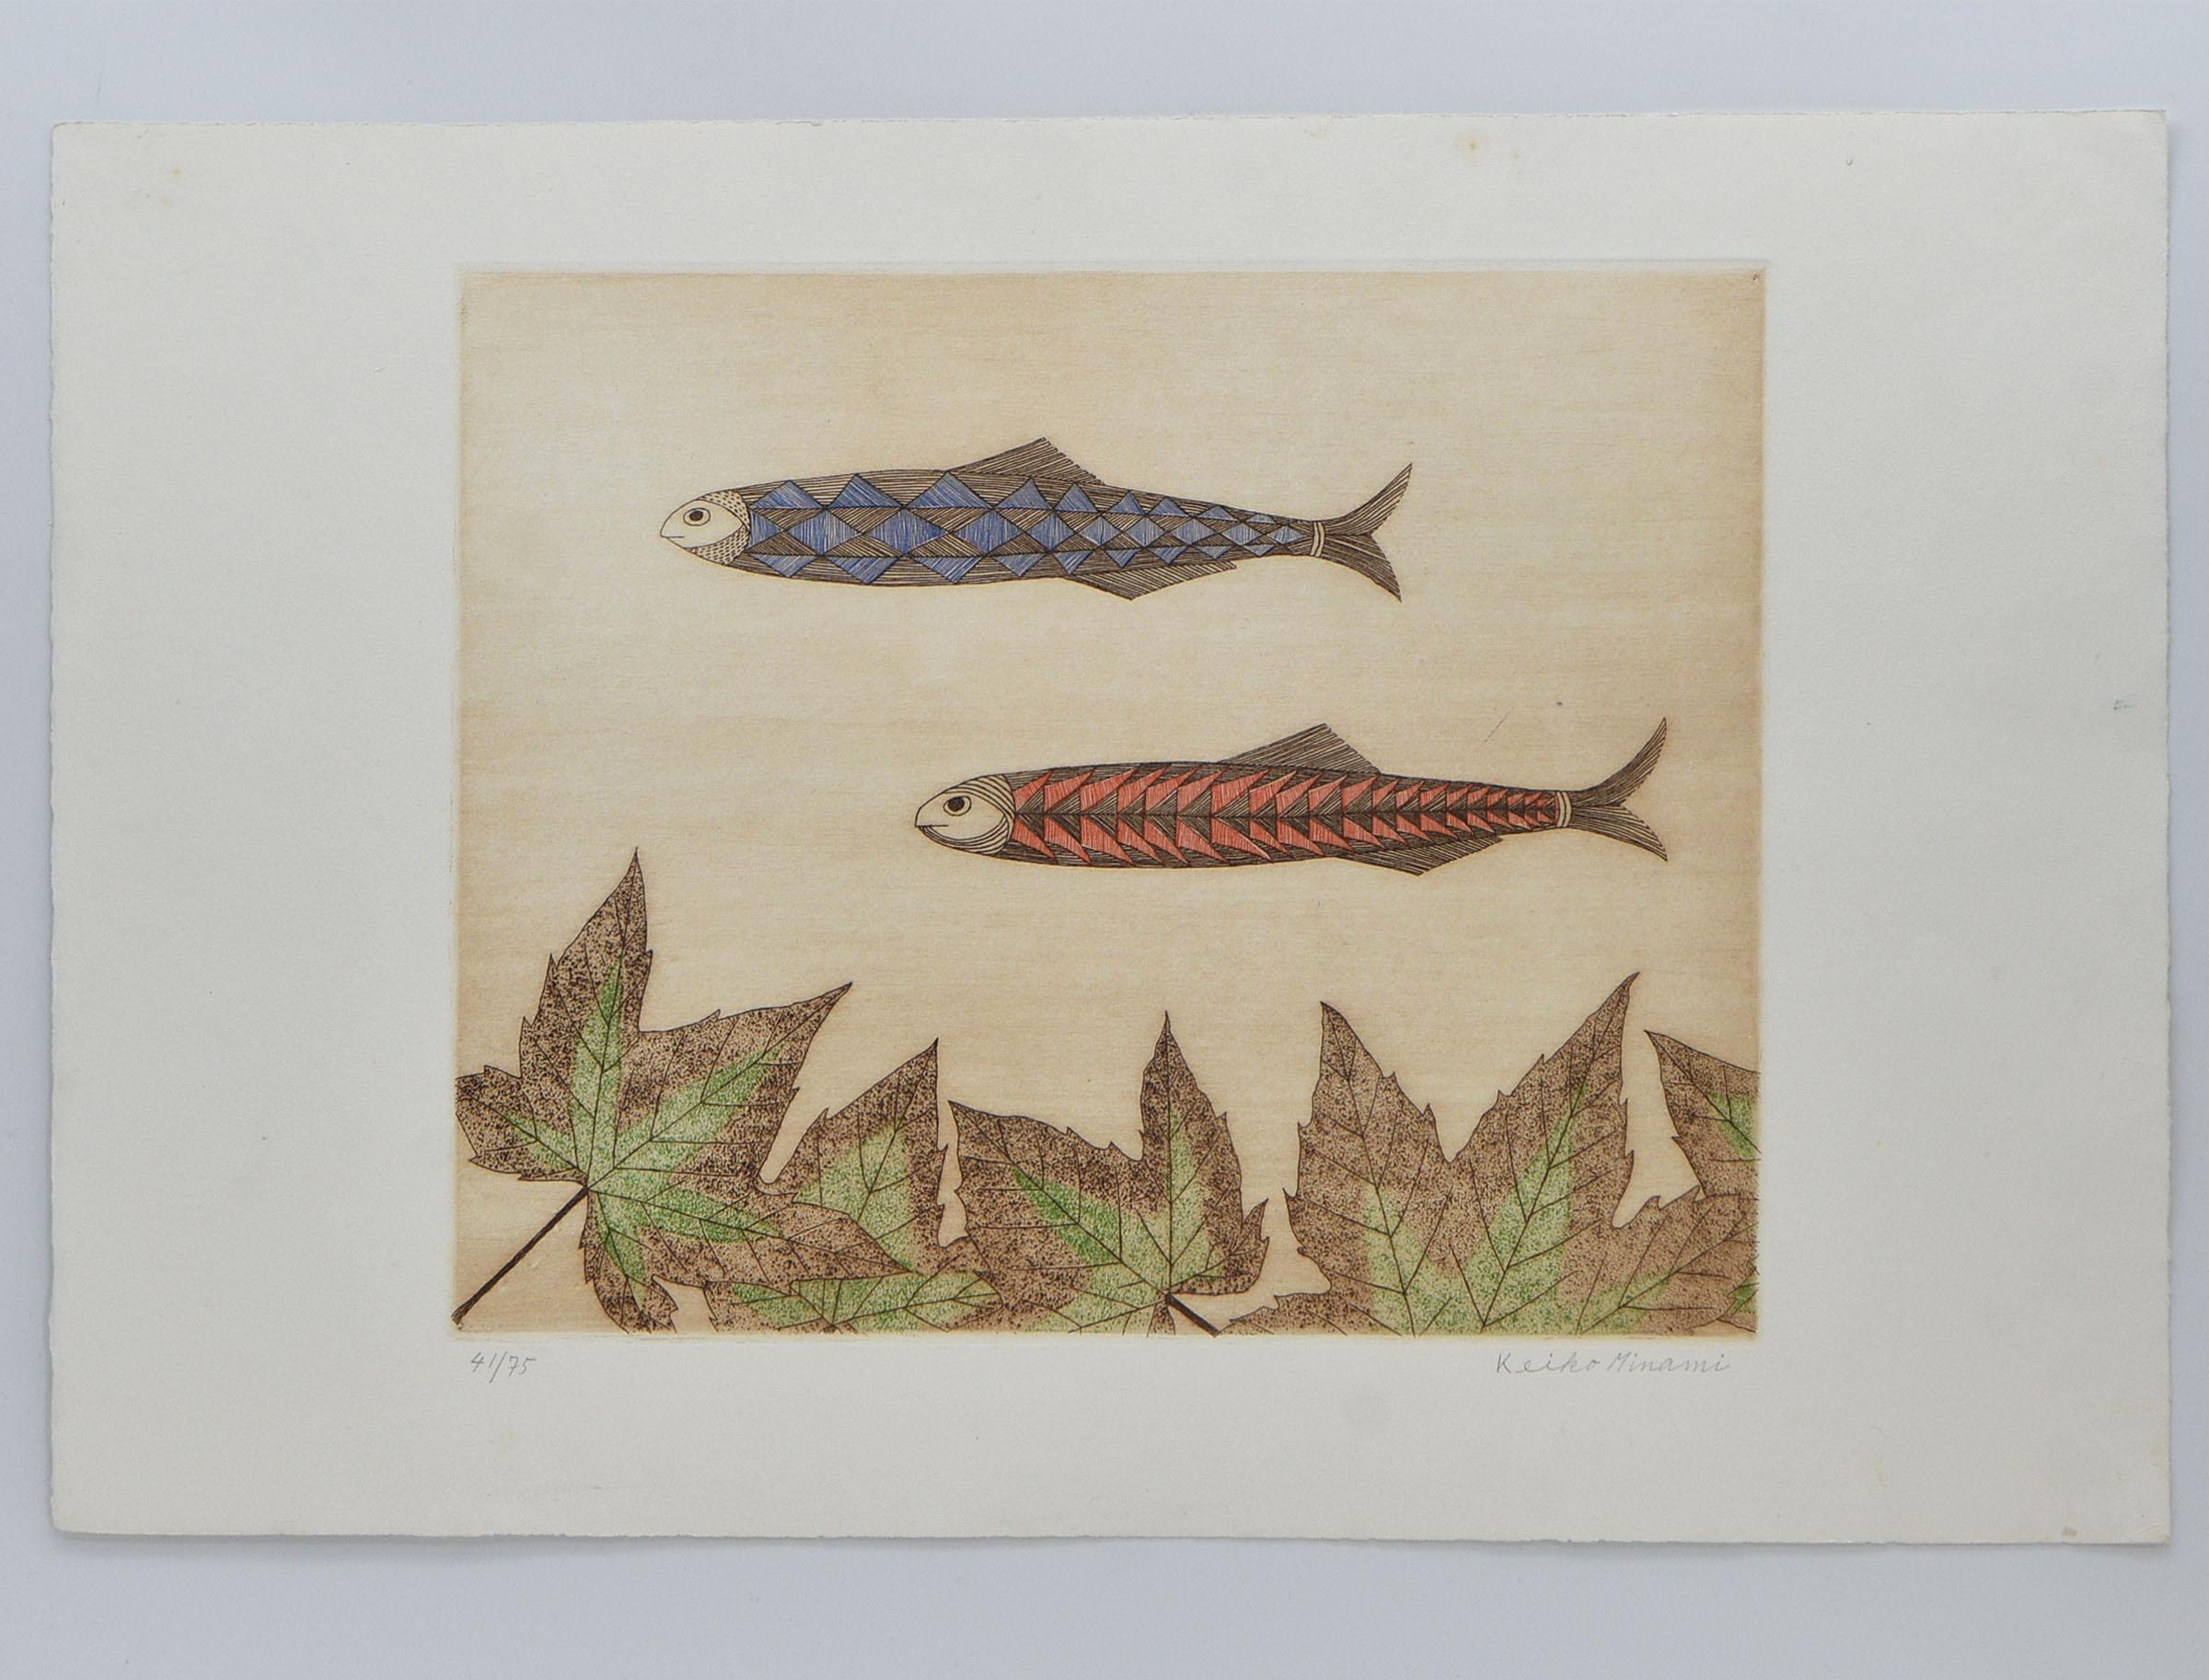 Paper Keiko Minami Signed Etching with Aquatint on Bfk Rives Wove 'Fishes' Japanese For Sale